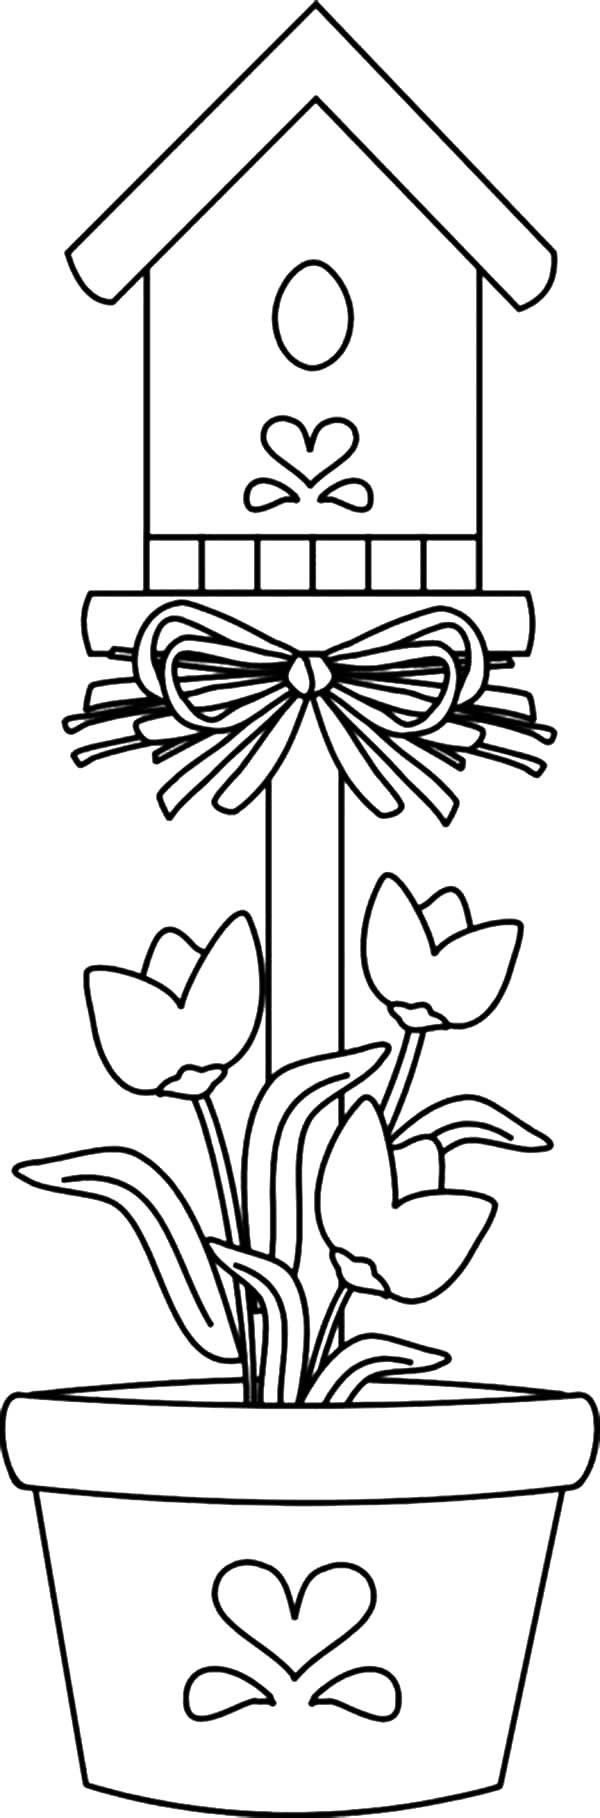 Birdhouse Coloring Page - Coloring Home